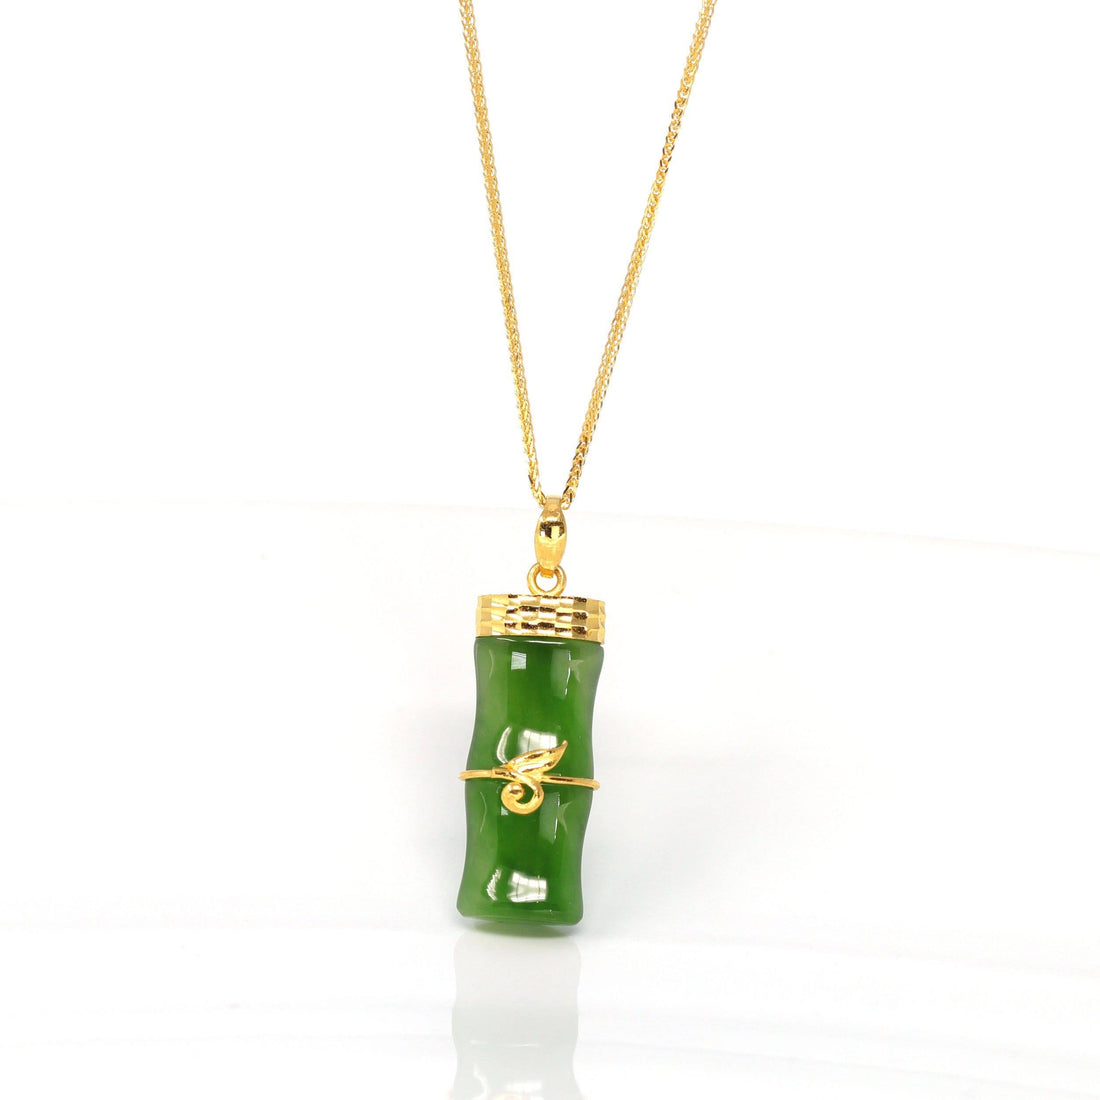 Baikalla Jewelry Gold Jade Necklace Pendant Only 24k Yellow Gold Genuine Nephrite Green Jade Bamboo Pendant Necklace